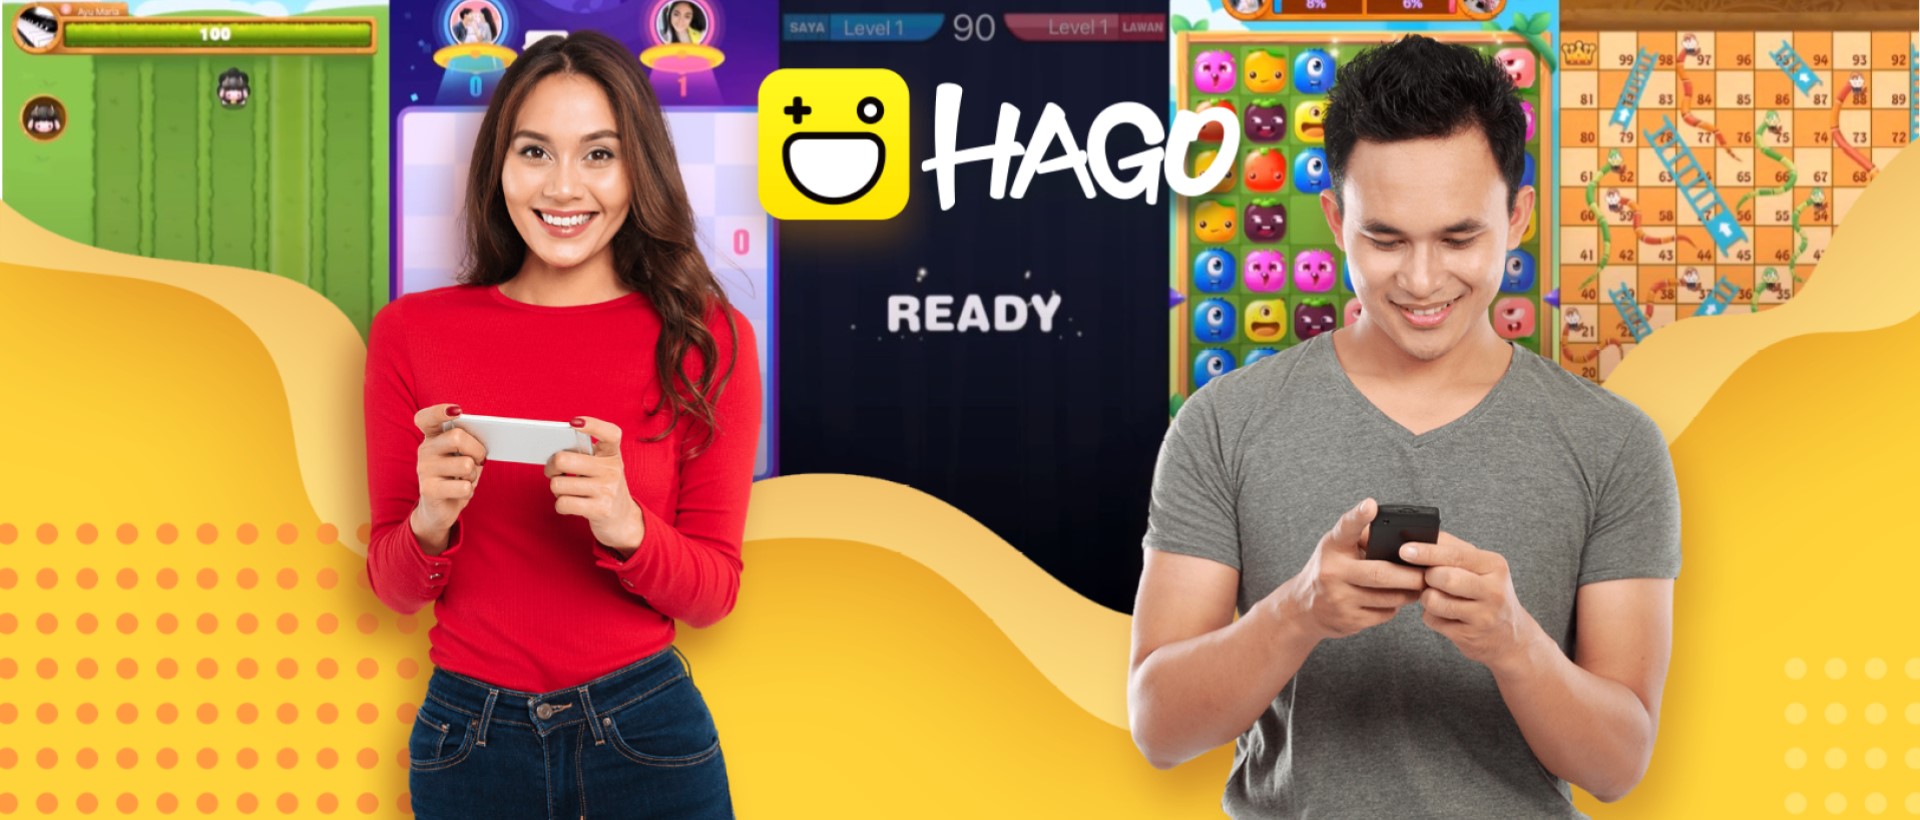 Download & Play HAGO on PC & Mac with NoxPlayer (Emulator)